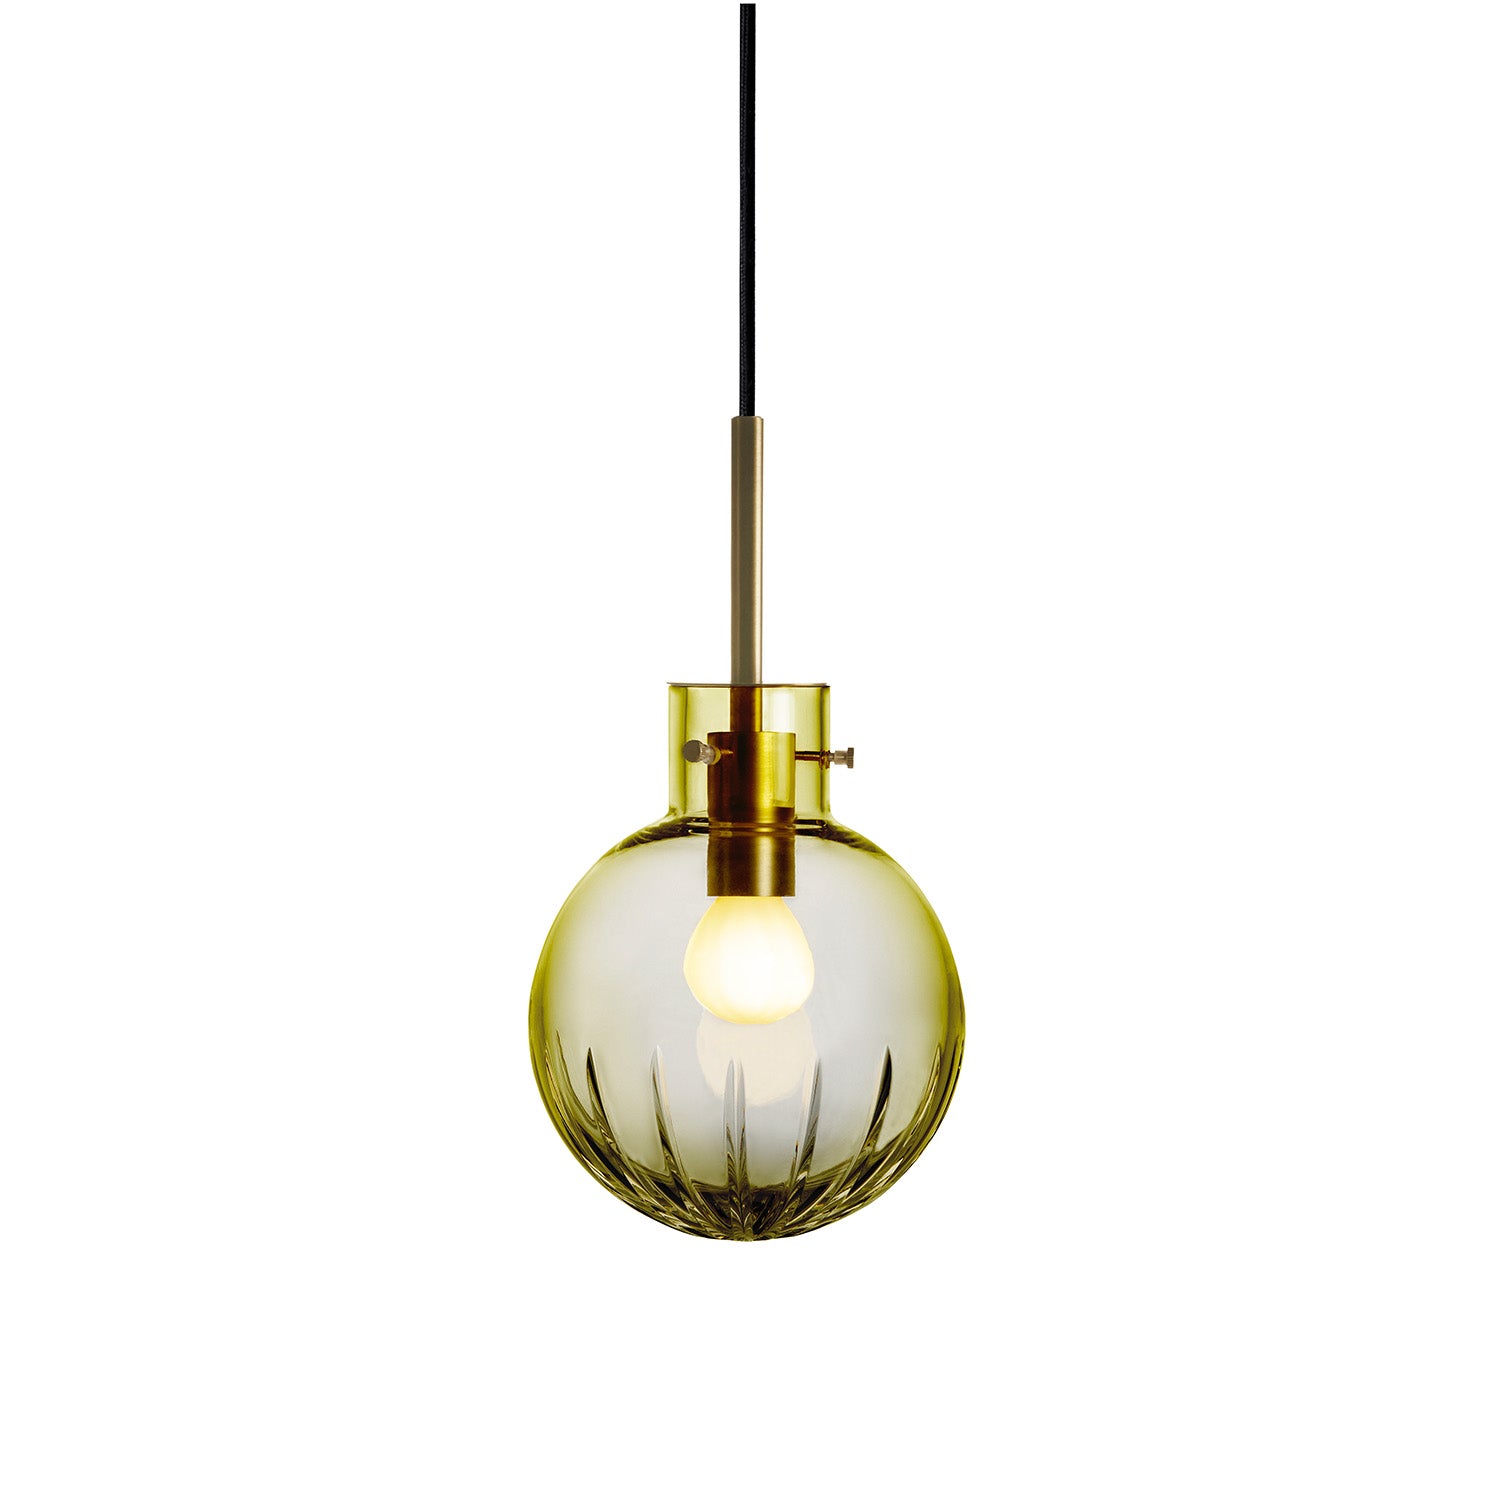 STAR - Handcrafted blown glass pendant lamp